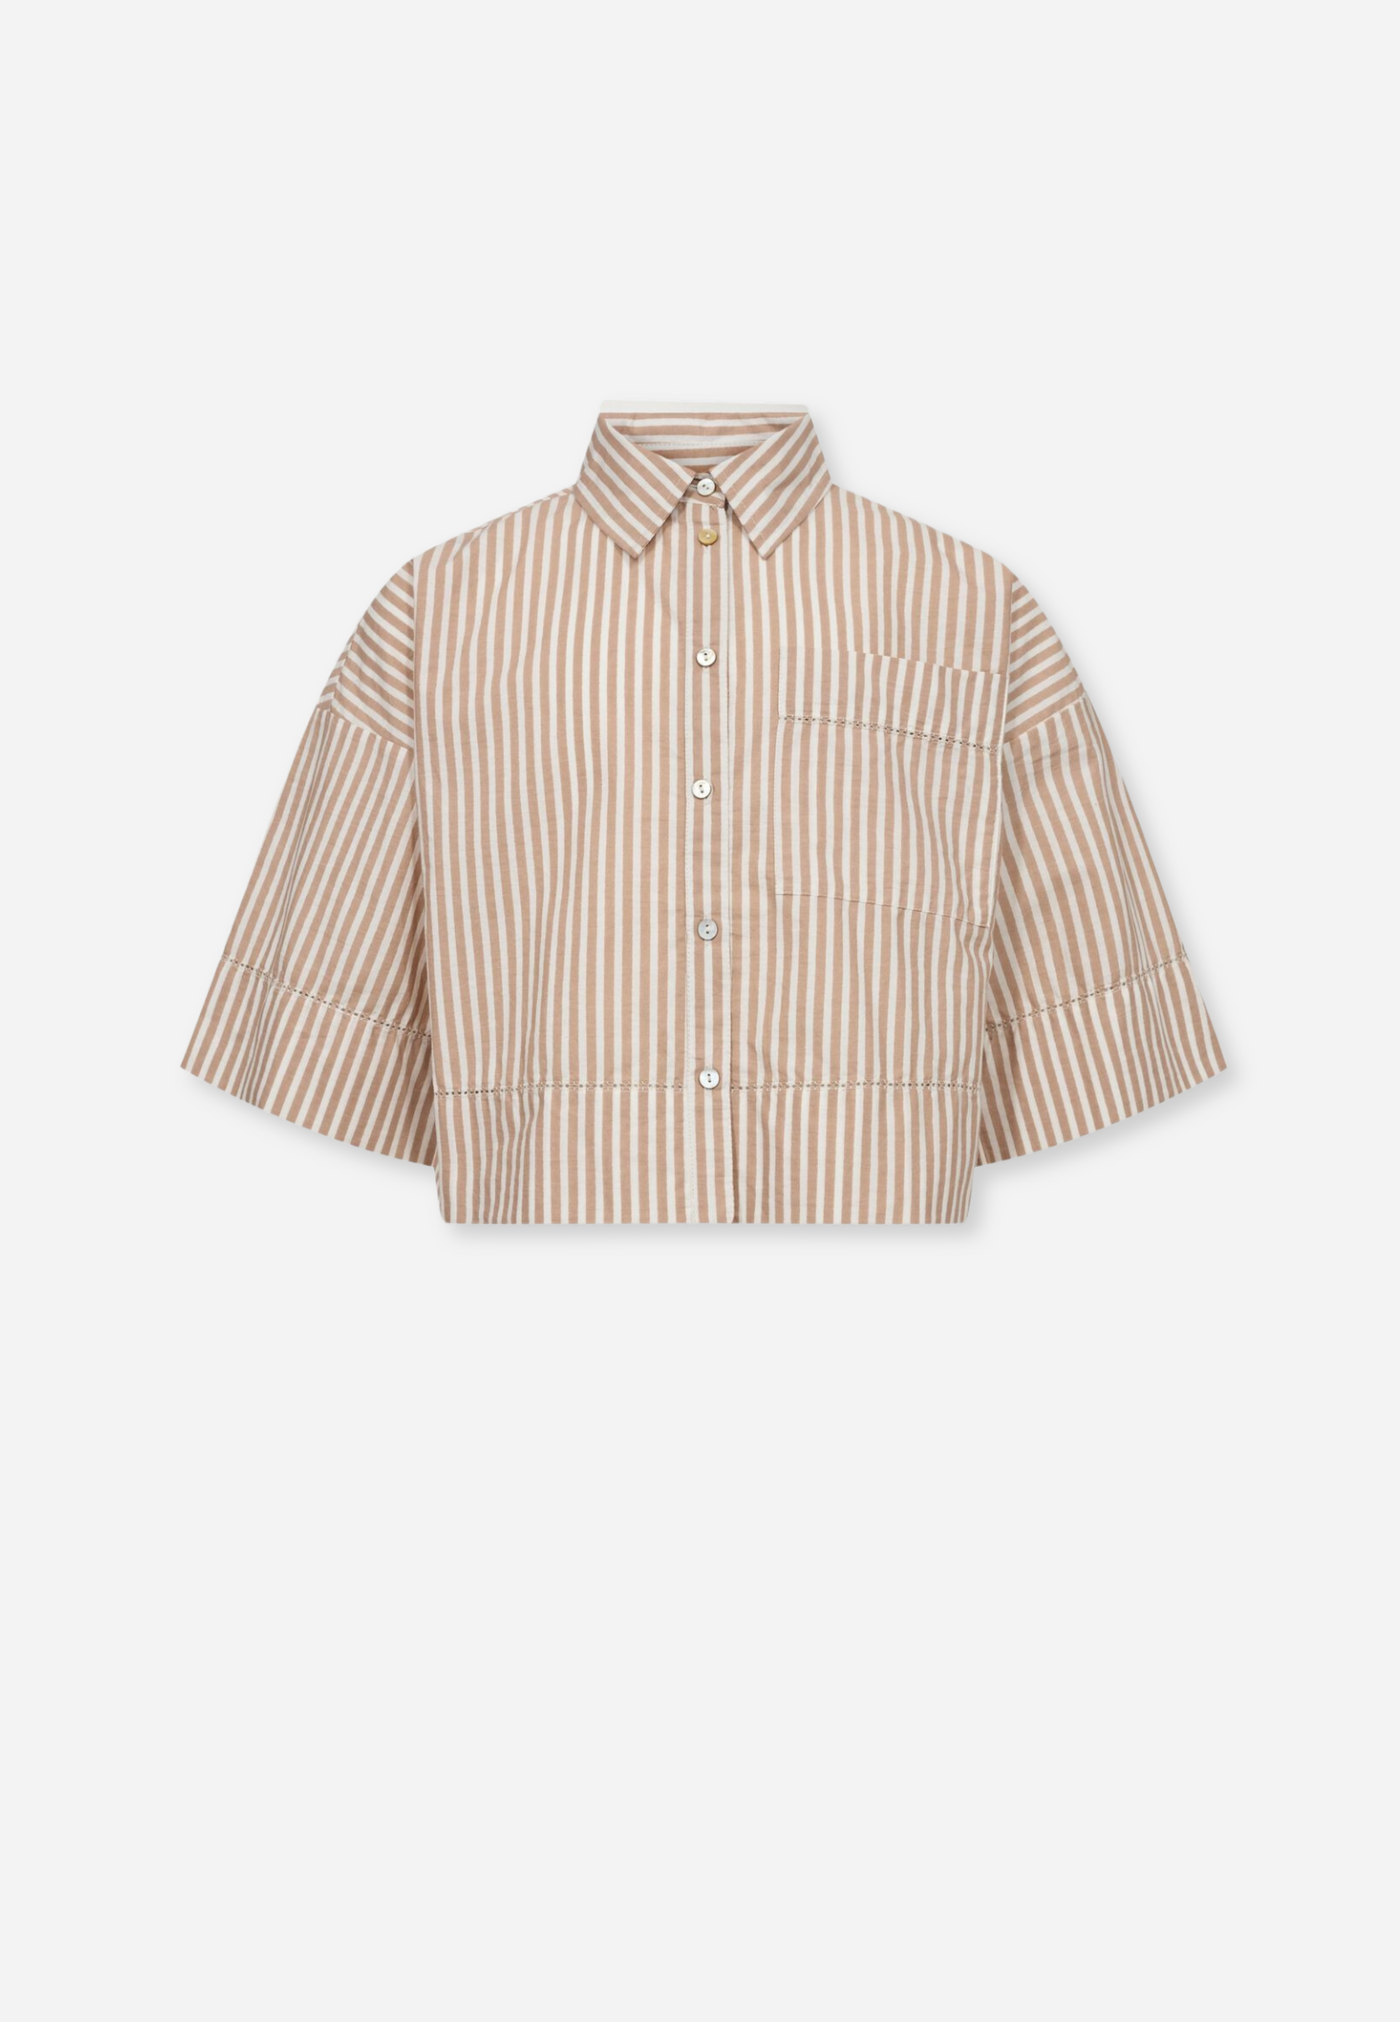 SHIRT - ROSY BROWN